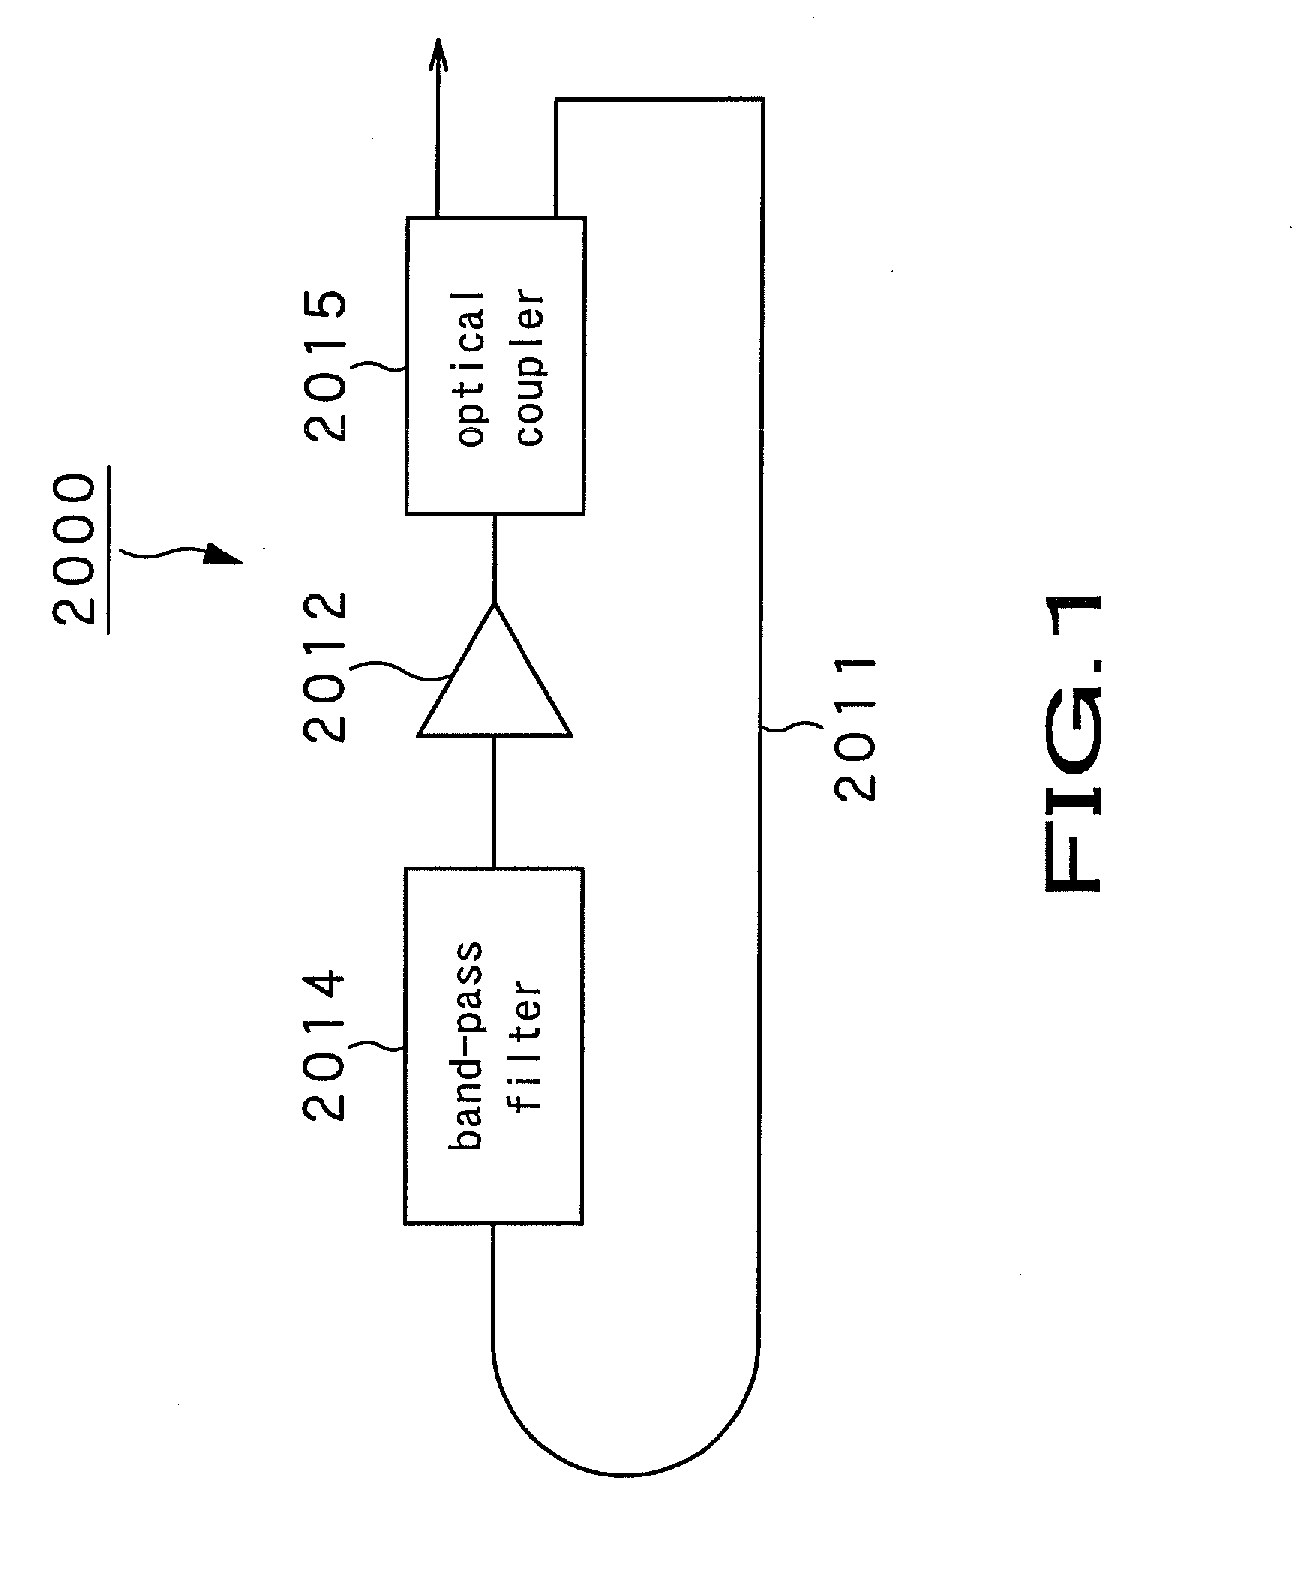 Wavelength scanning light source and optical coherence tomography device